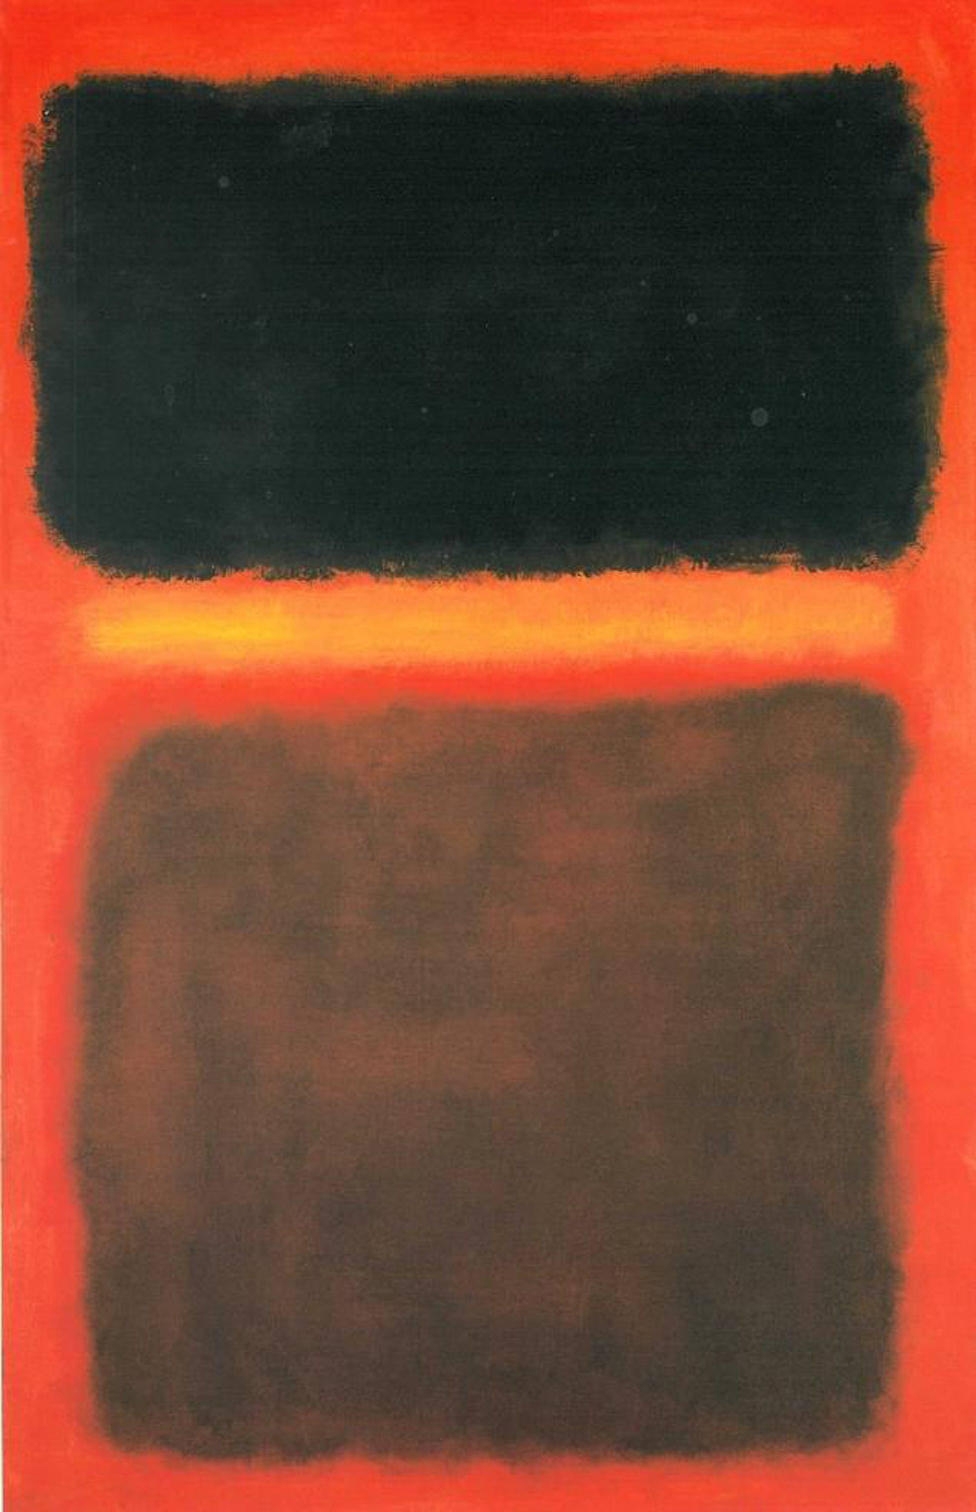 Not a Rothko: one of the forgeries that led to  the closure of New York gallery Knoedler & Co in 2011 